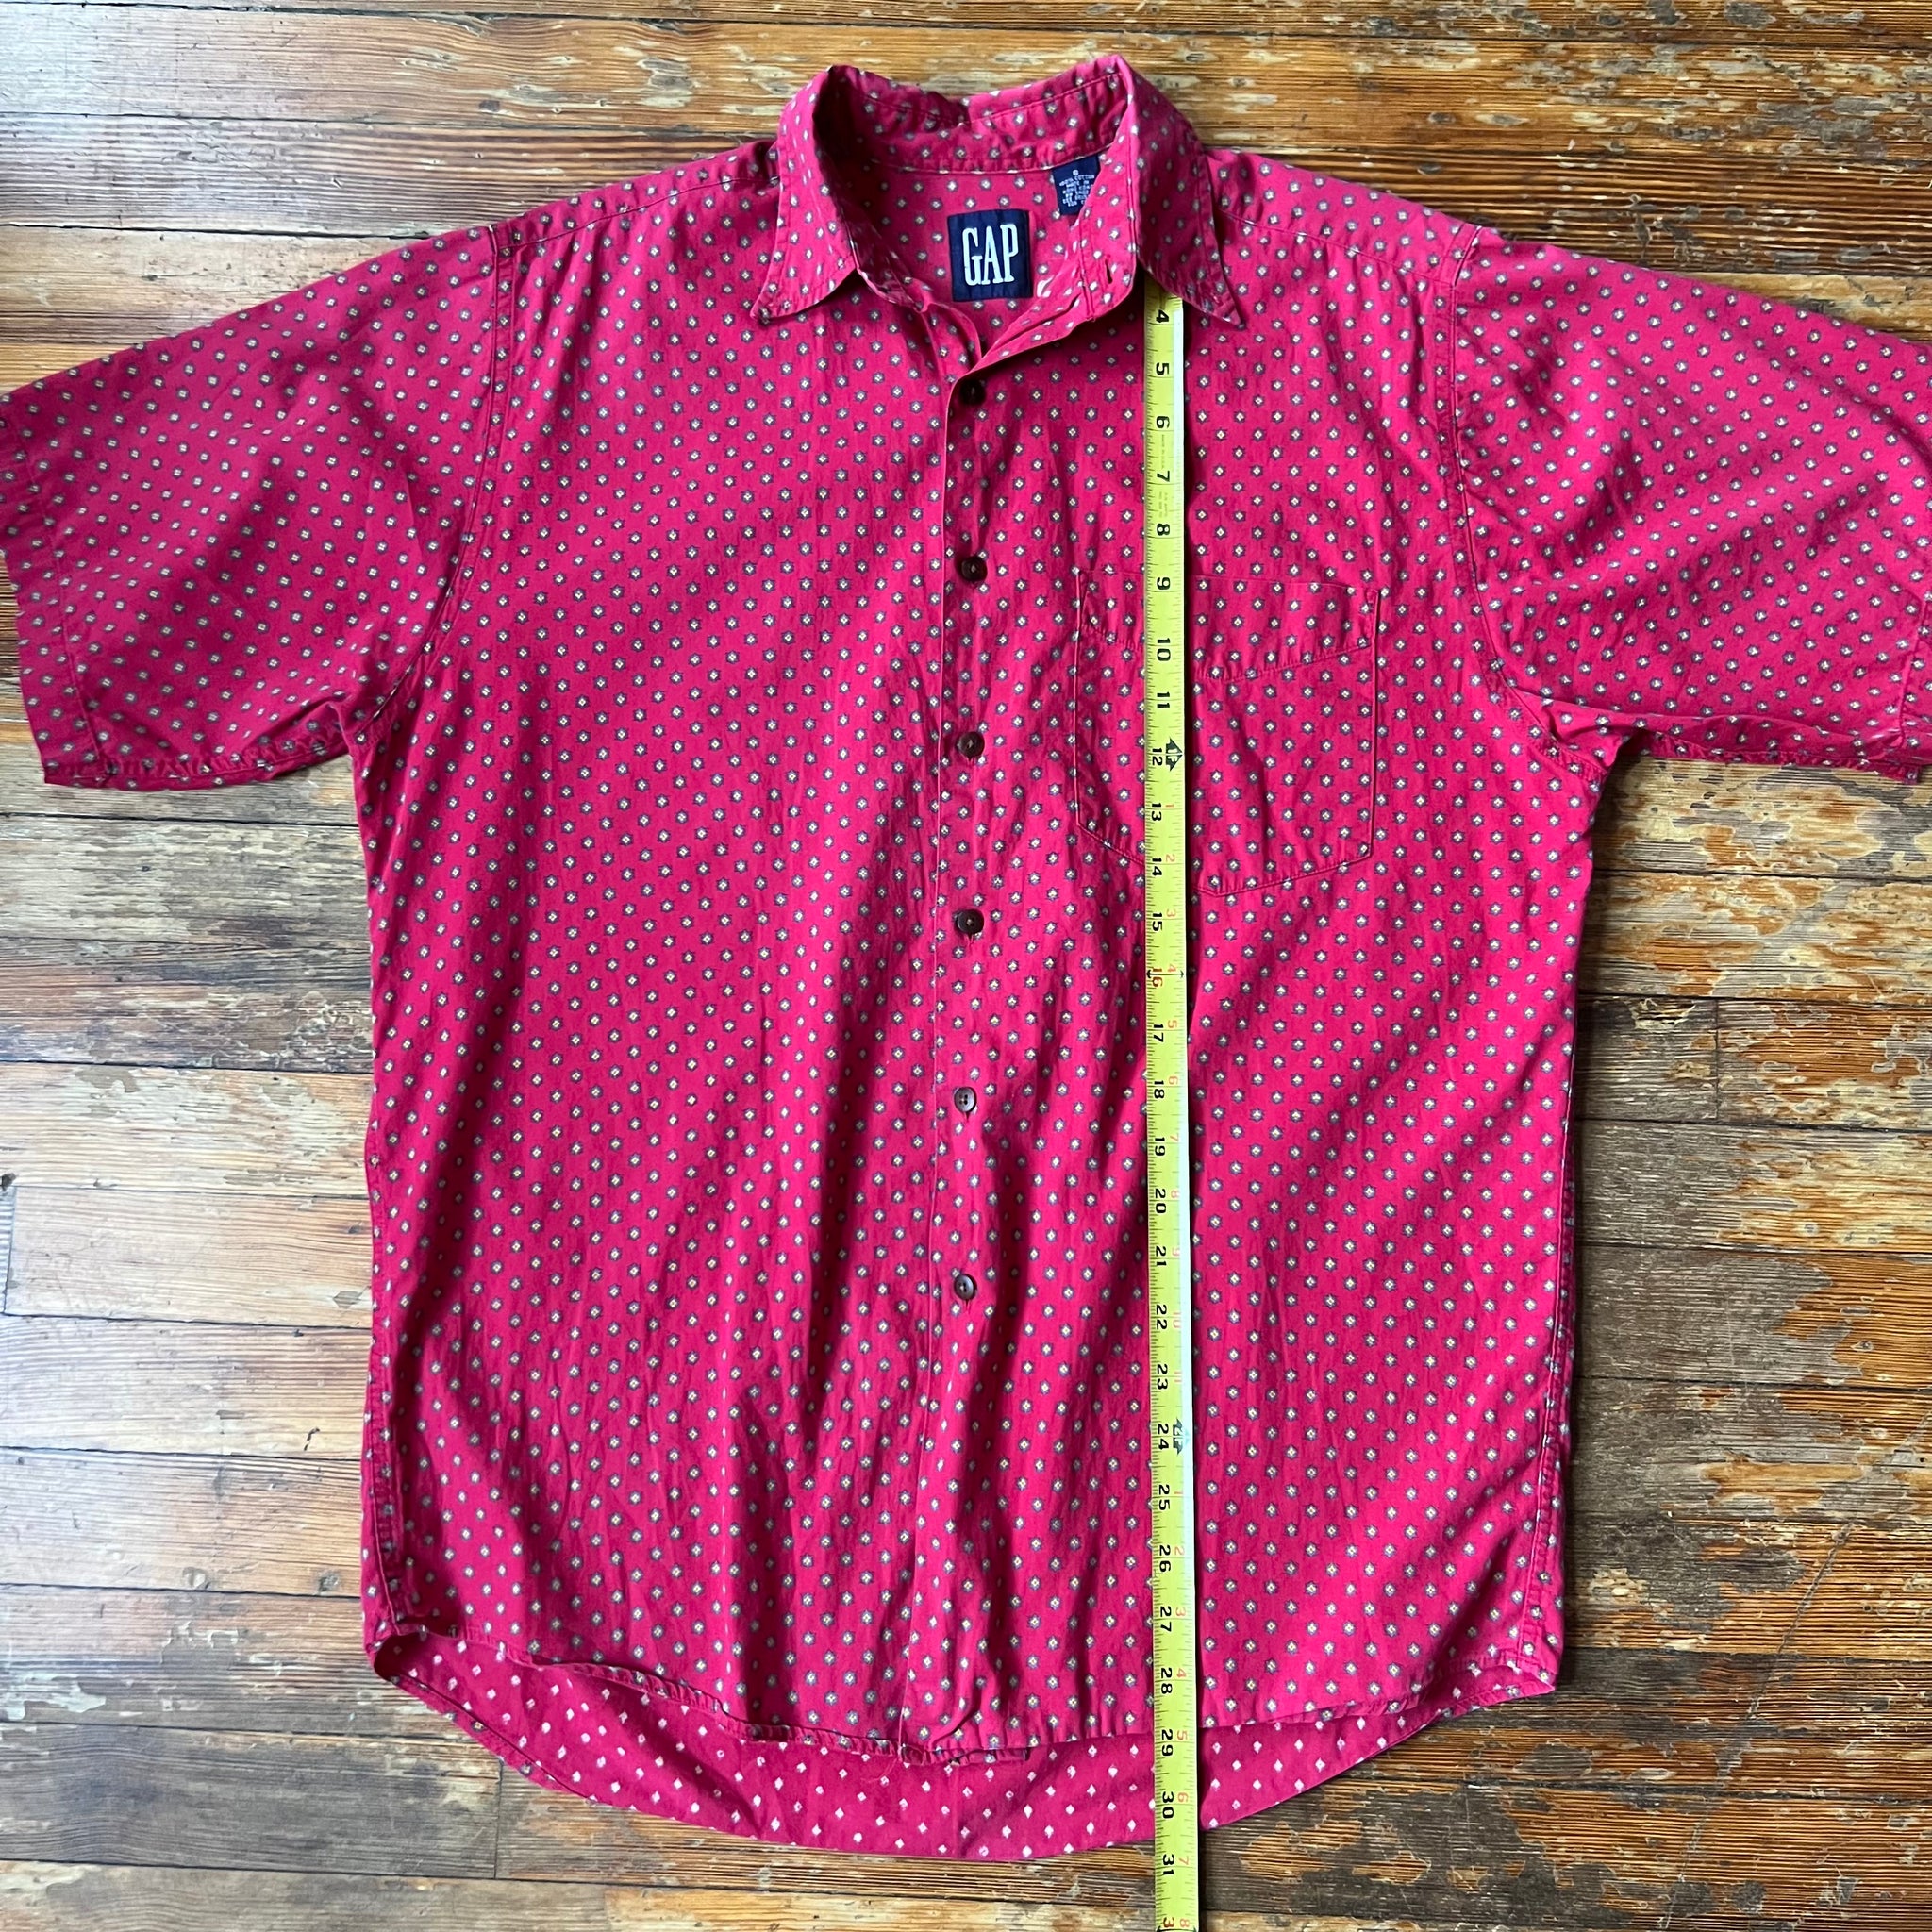 90s GAP Patterned Button Up Medium/Large